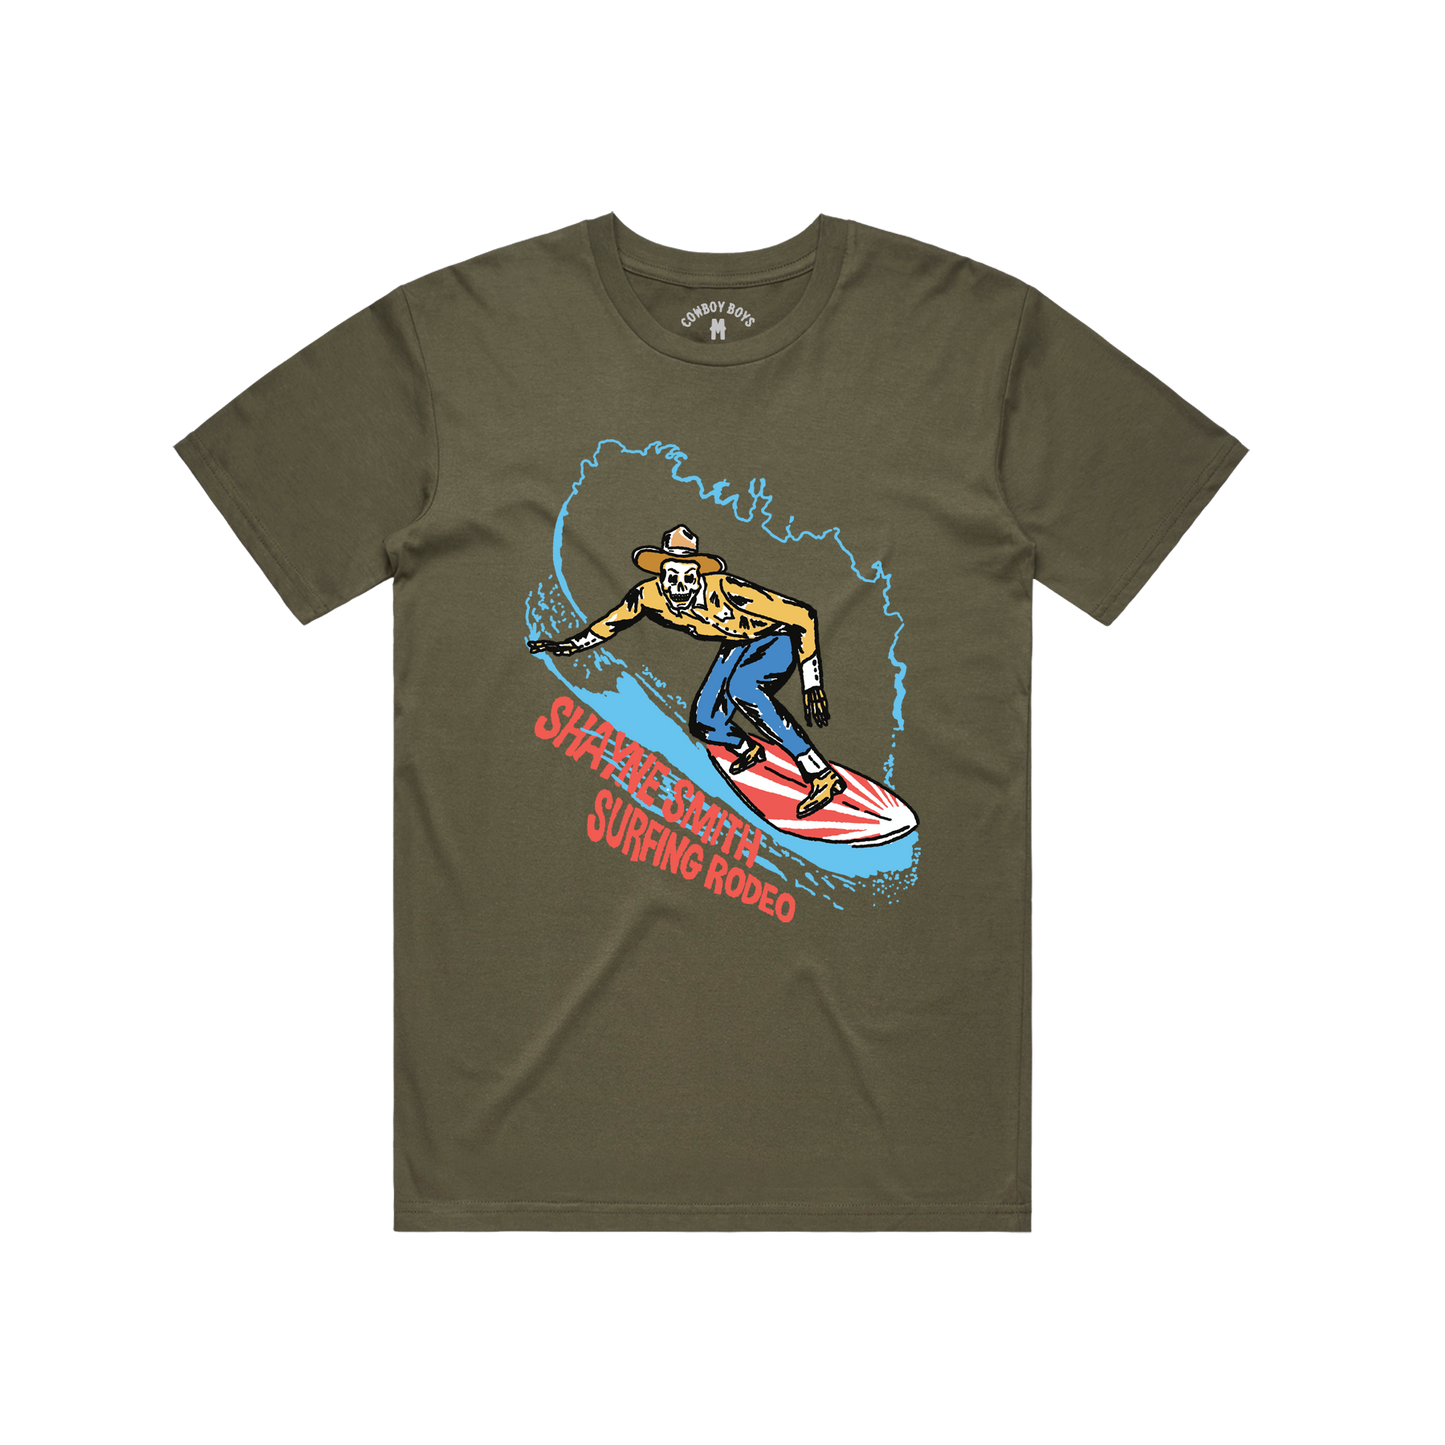 Surfing Rodeo Tee